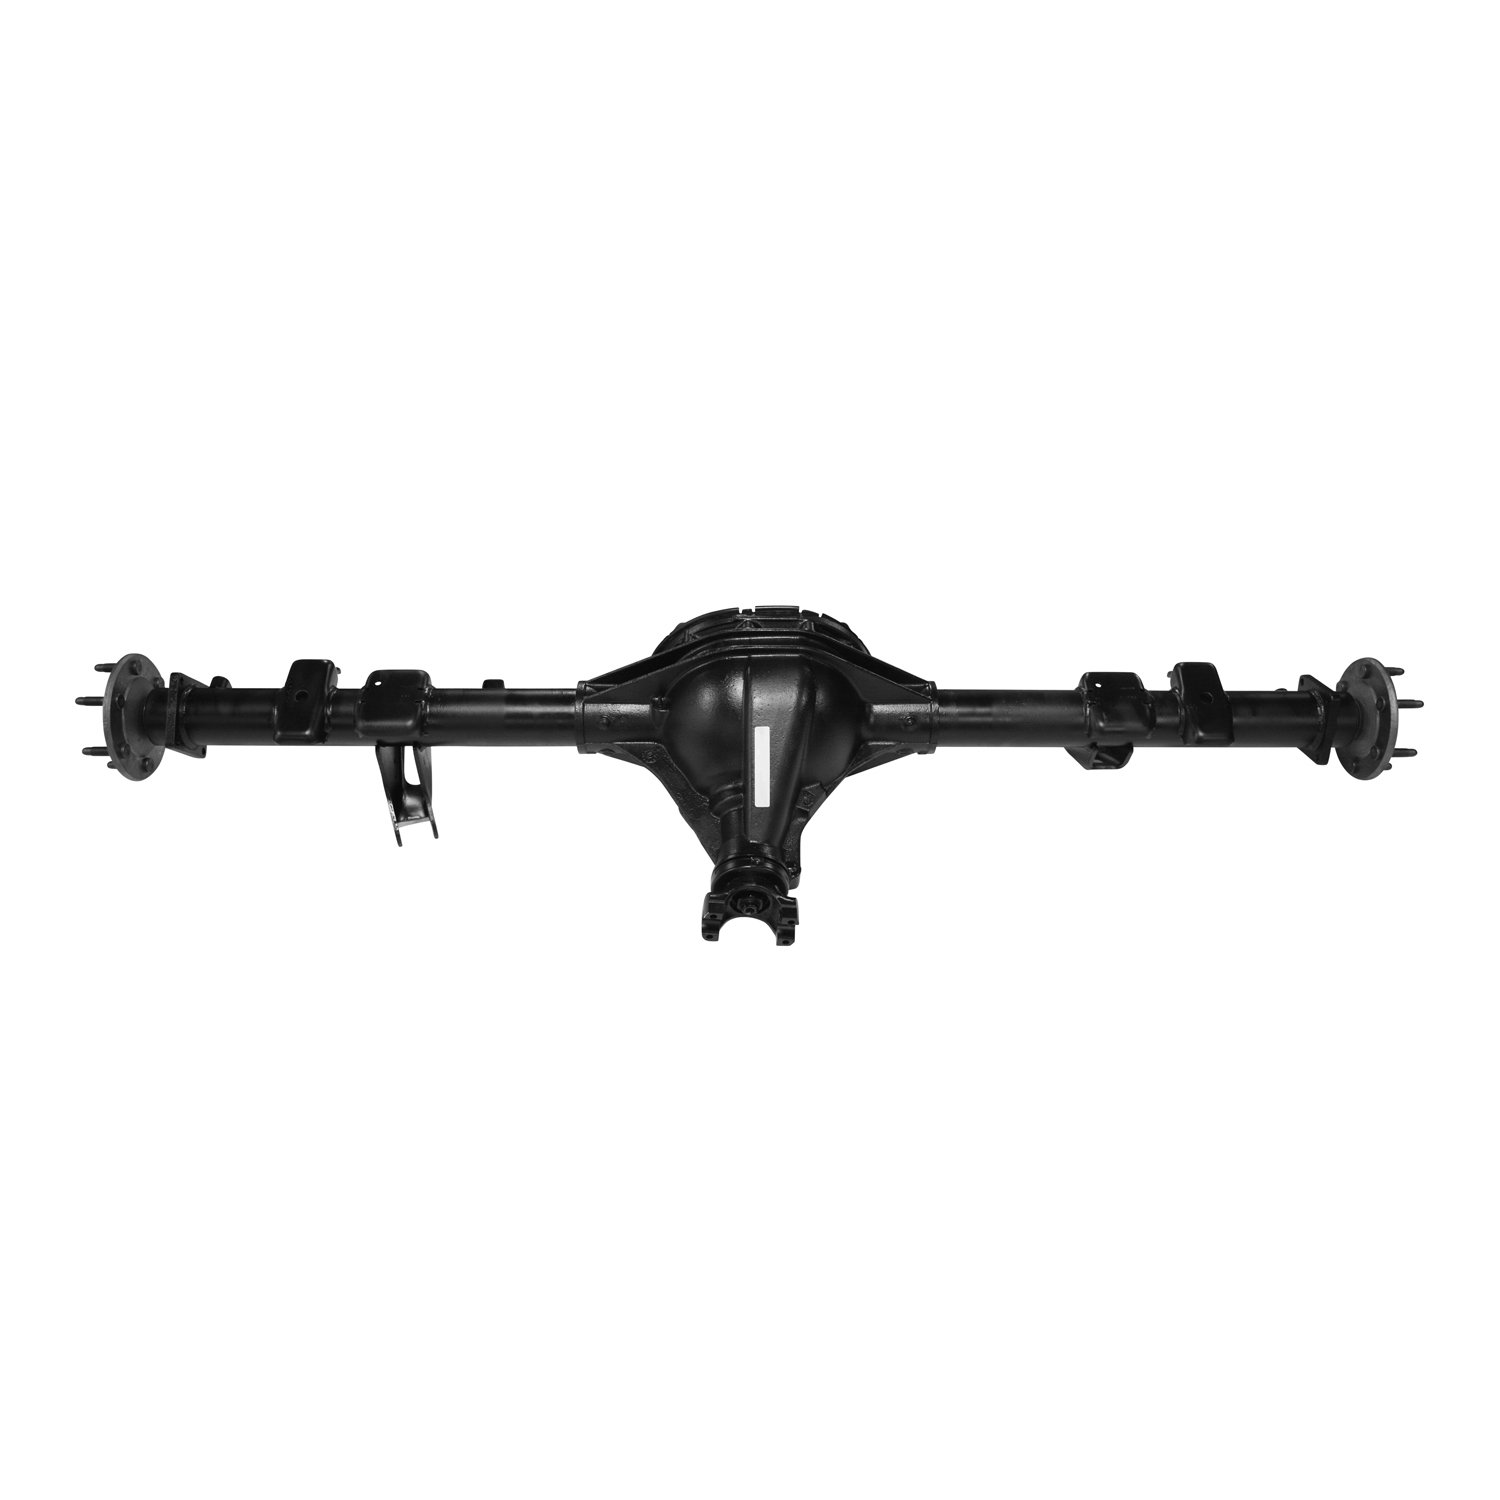 Remanufactured 9.5" Rear diff Axle Assembly for 2014-19 GM 1500 With 3.42 Gear Ratio, Posi